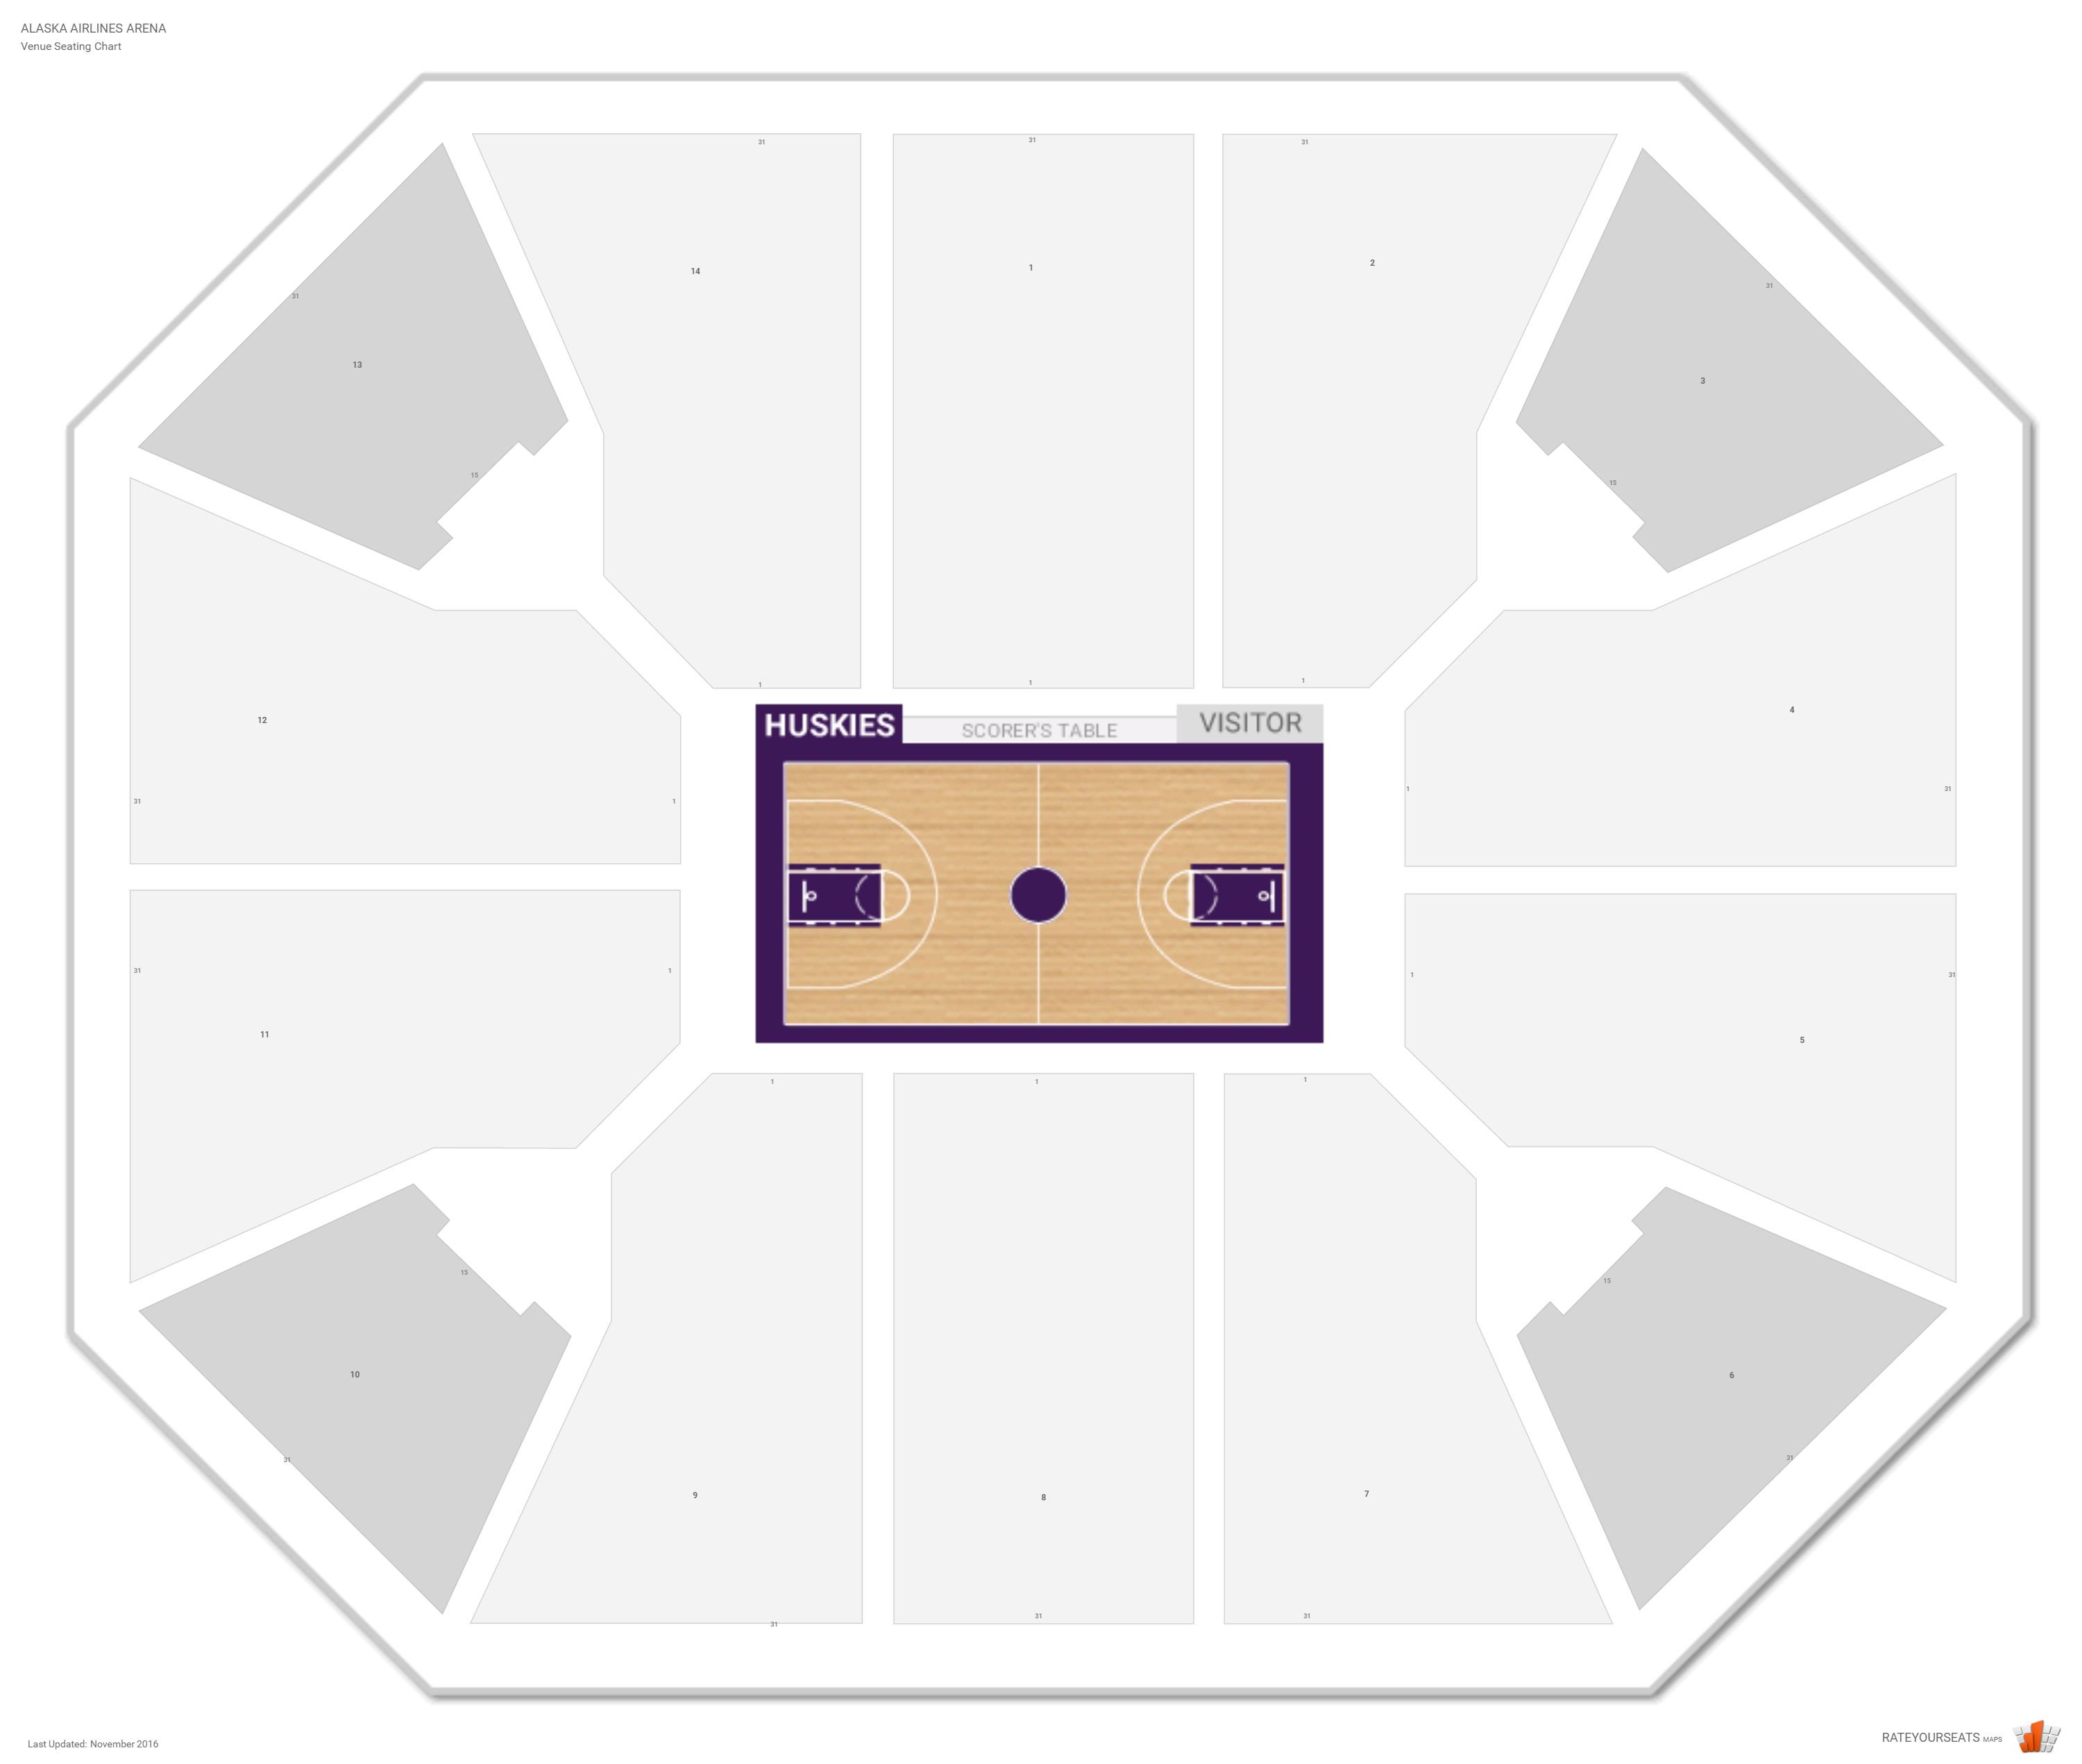 Alaska Airlines Arena Seating Chart Rows